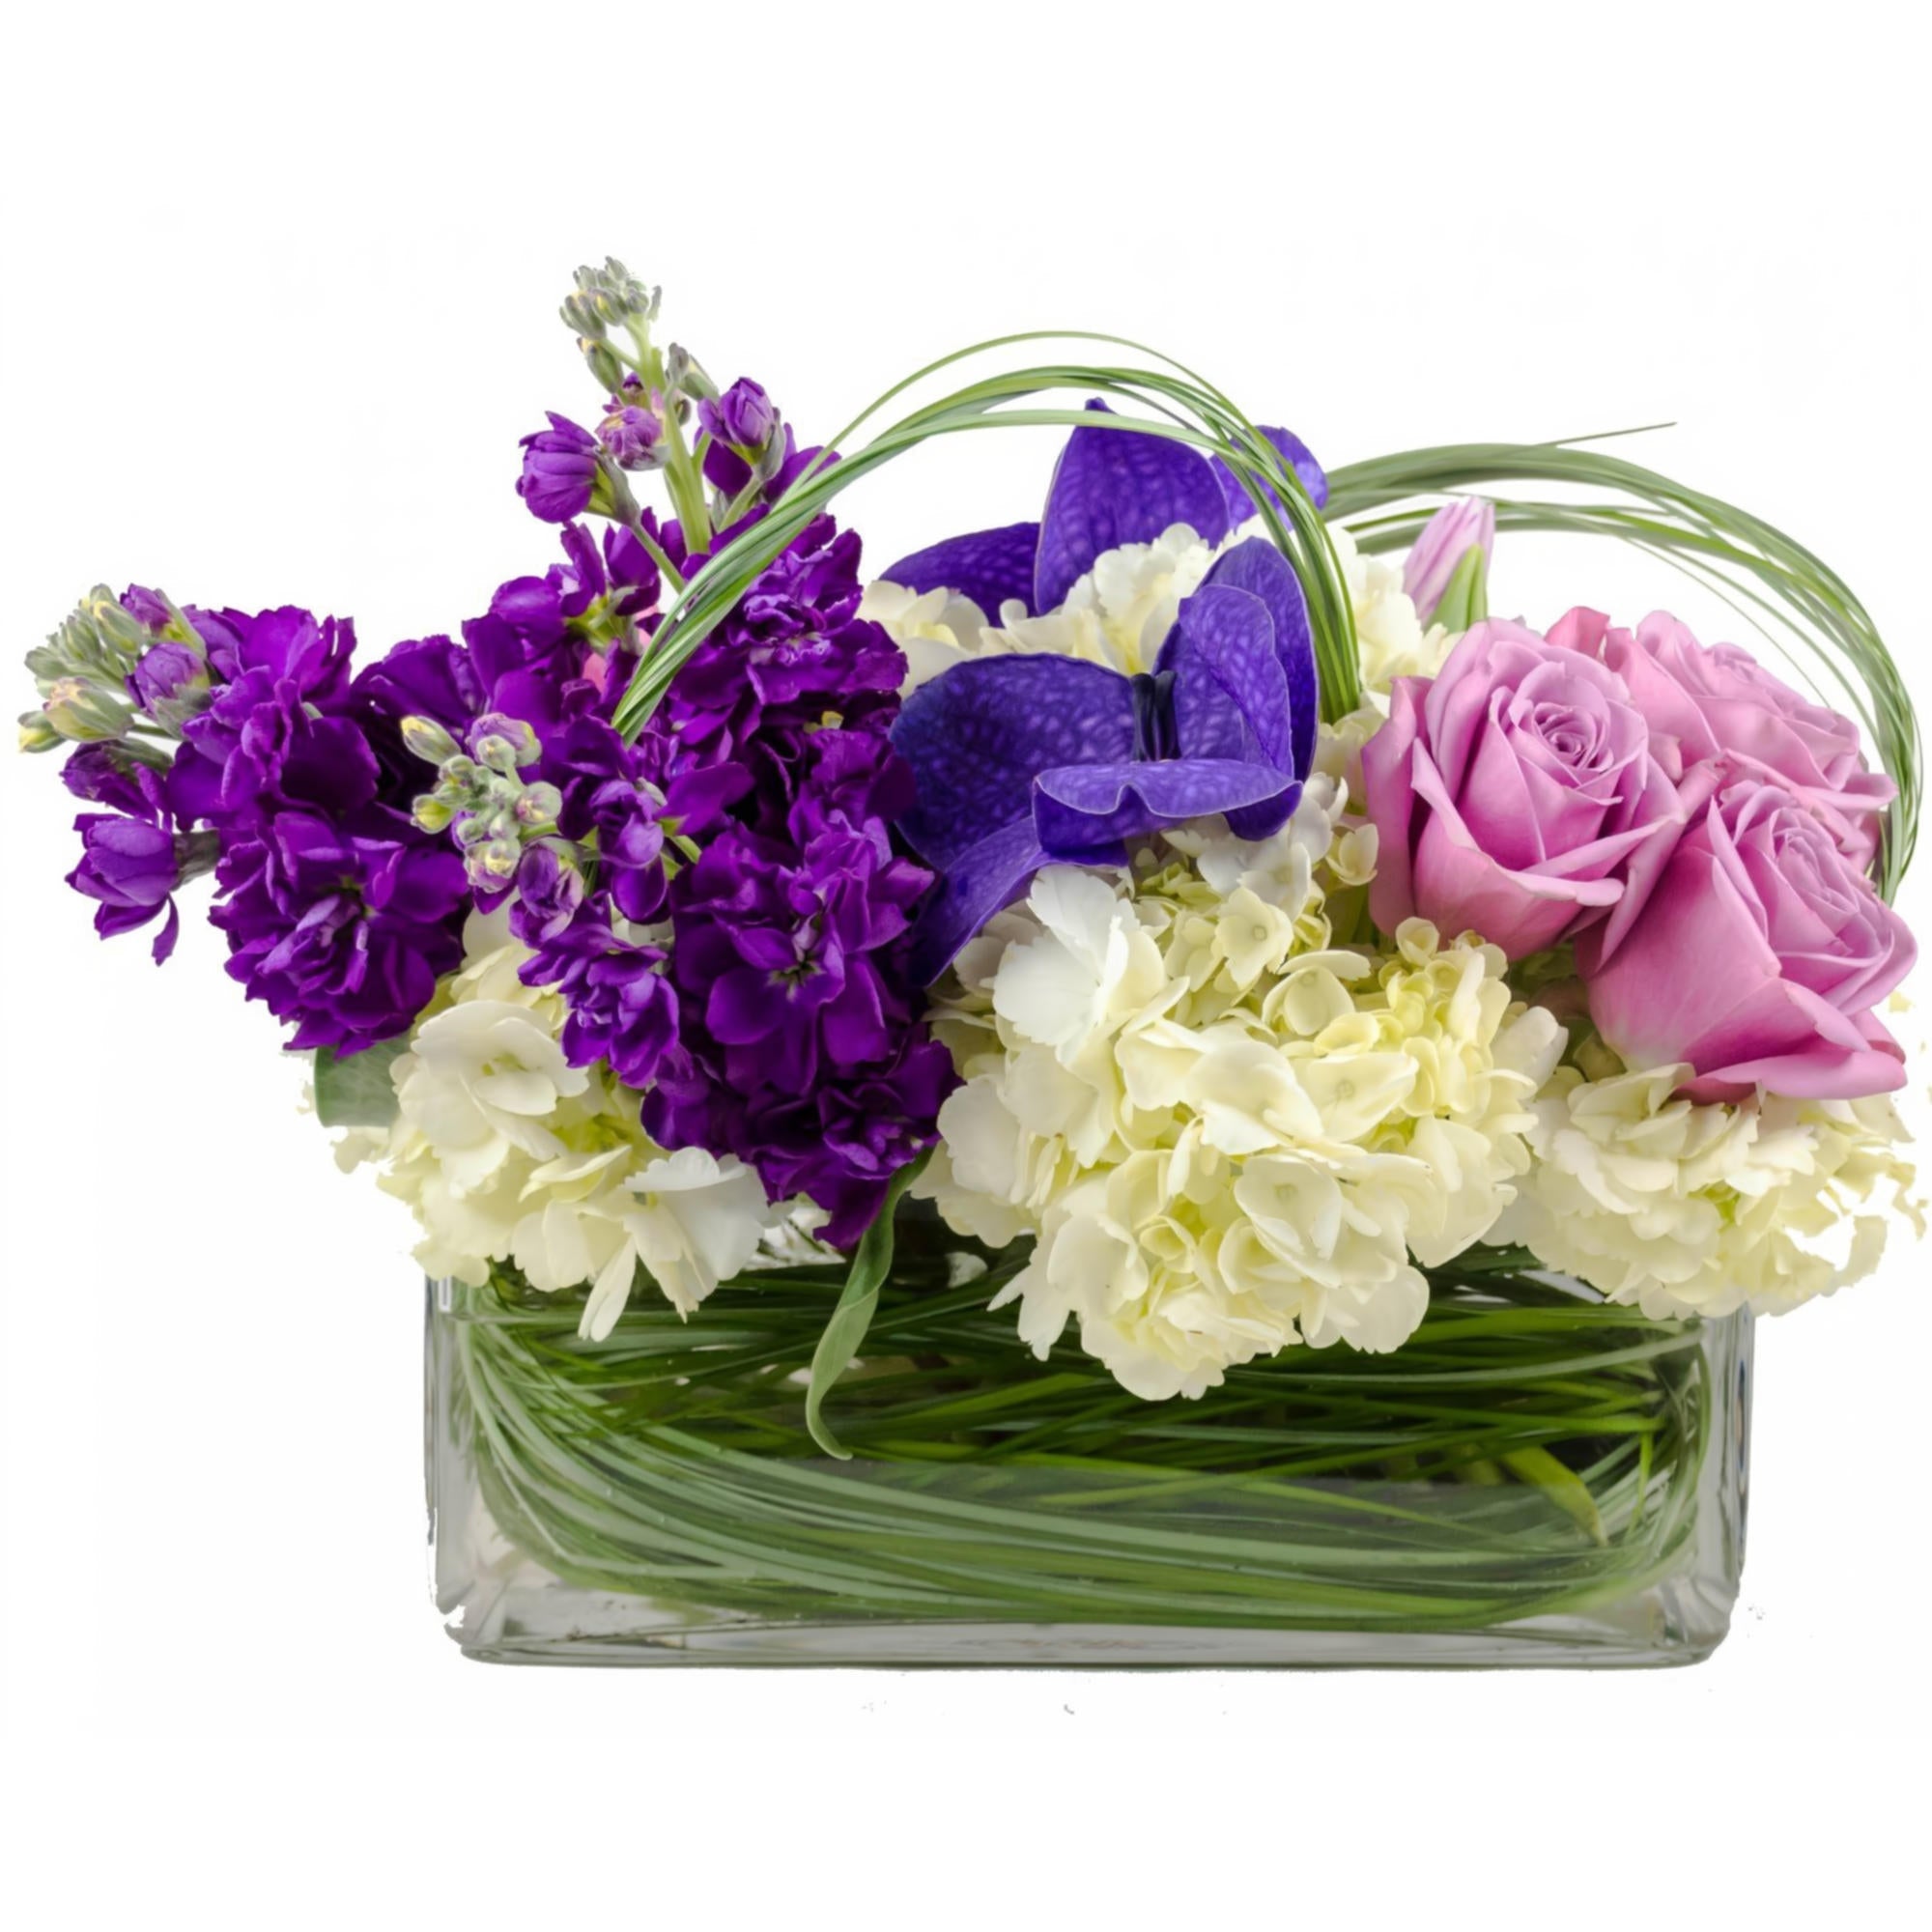 Fabulous Days To Come is a hand arranged floral bouquet, by Queens Flower Delivery, in a modern rectangular vase full of Hydrangeas, Purple stock, lavender roses, ti leaf and bear grass. 